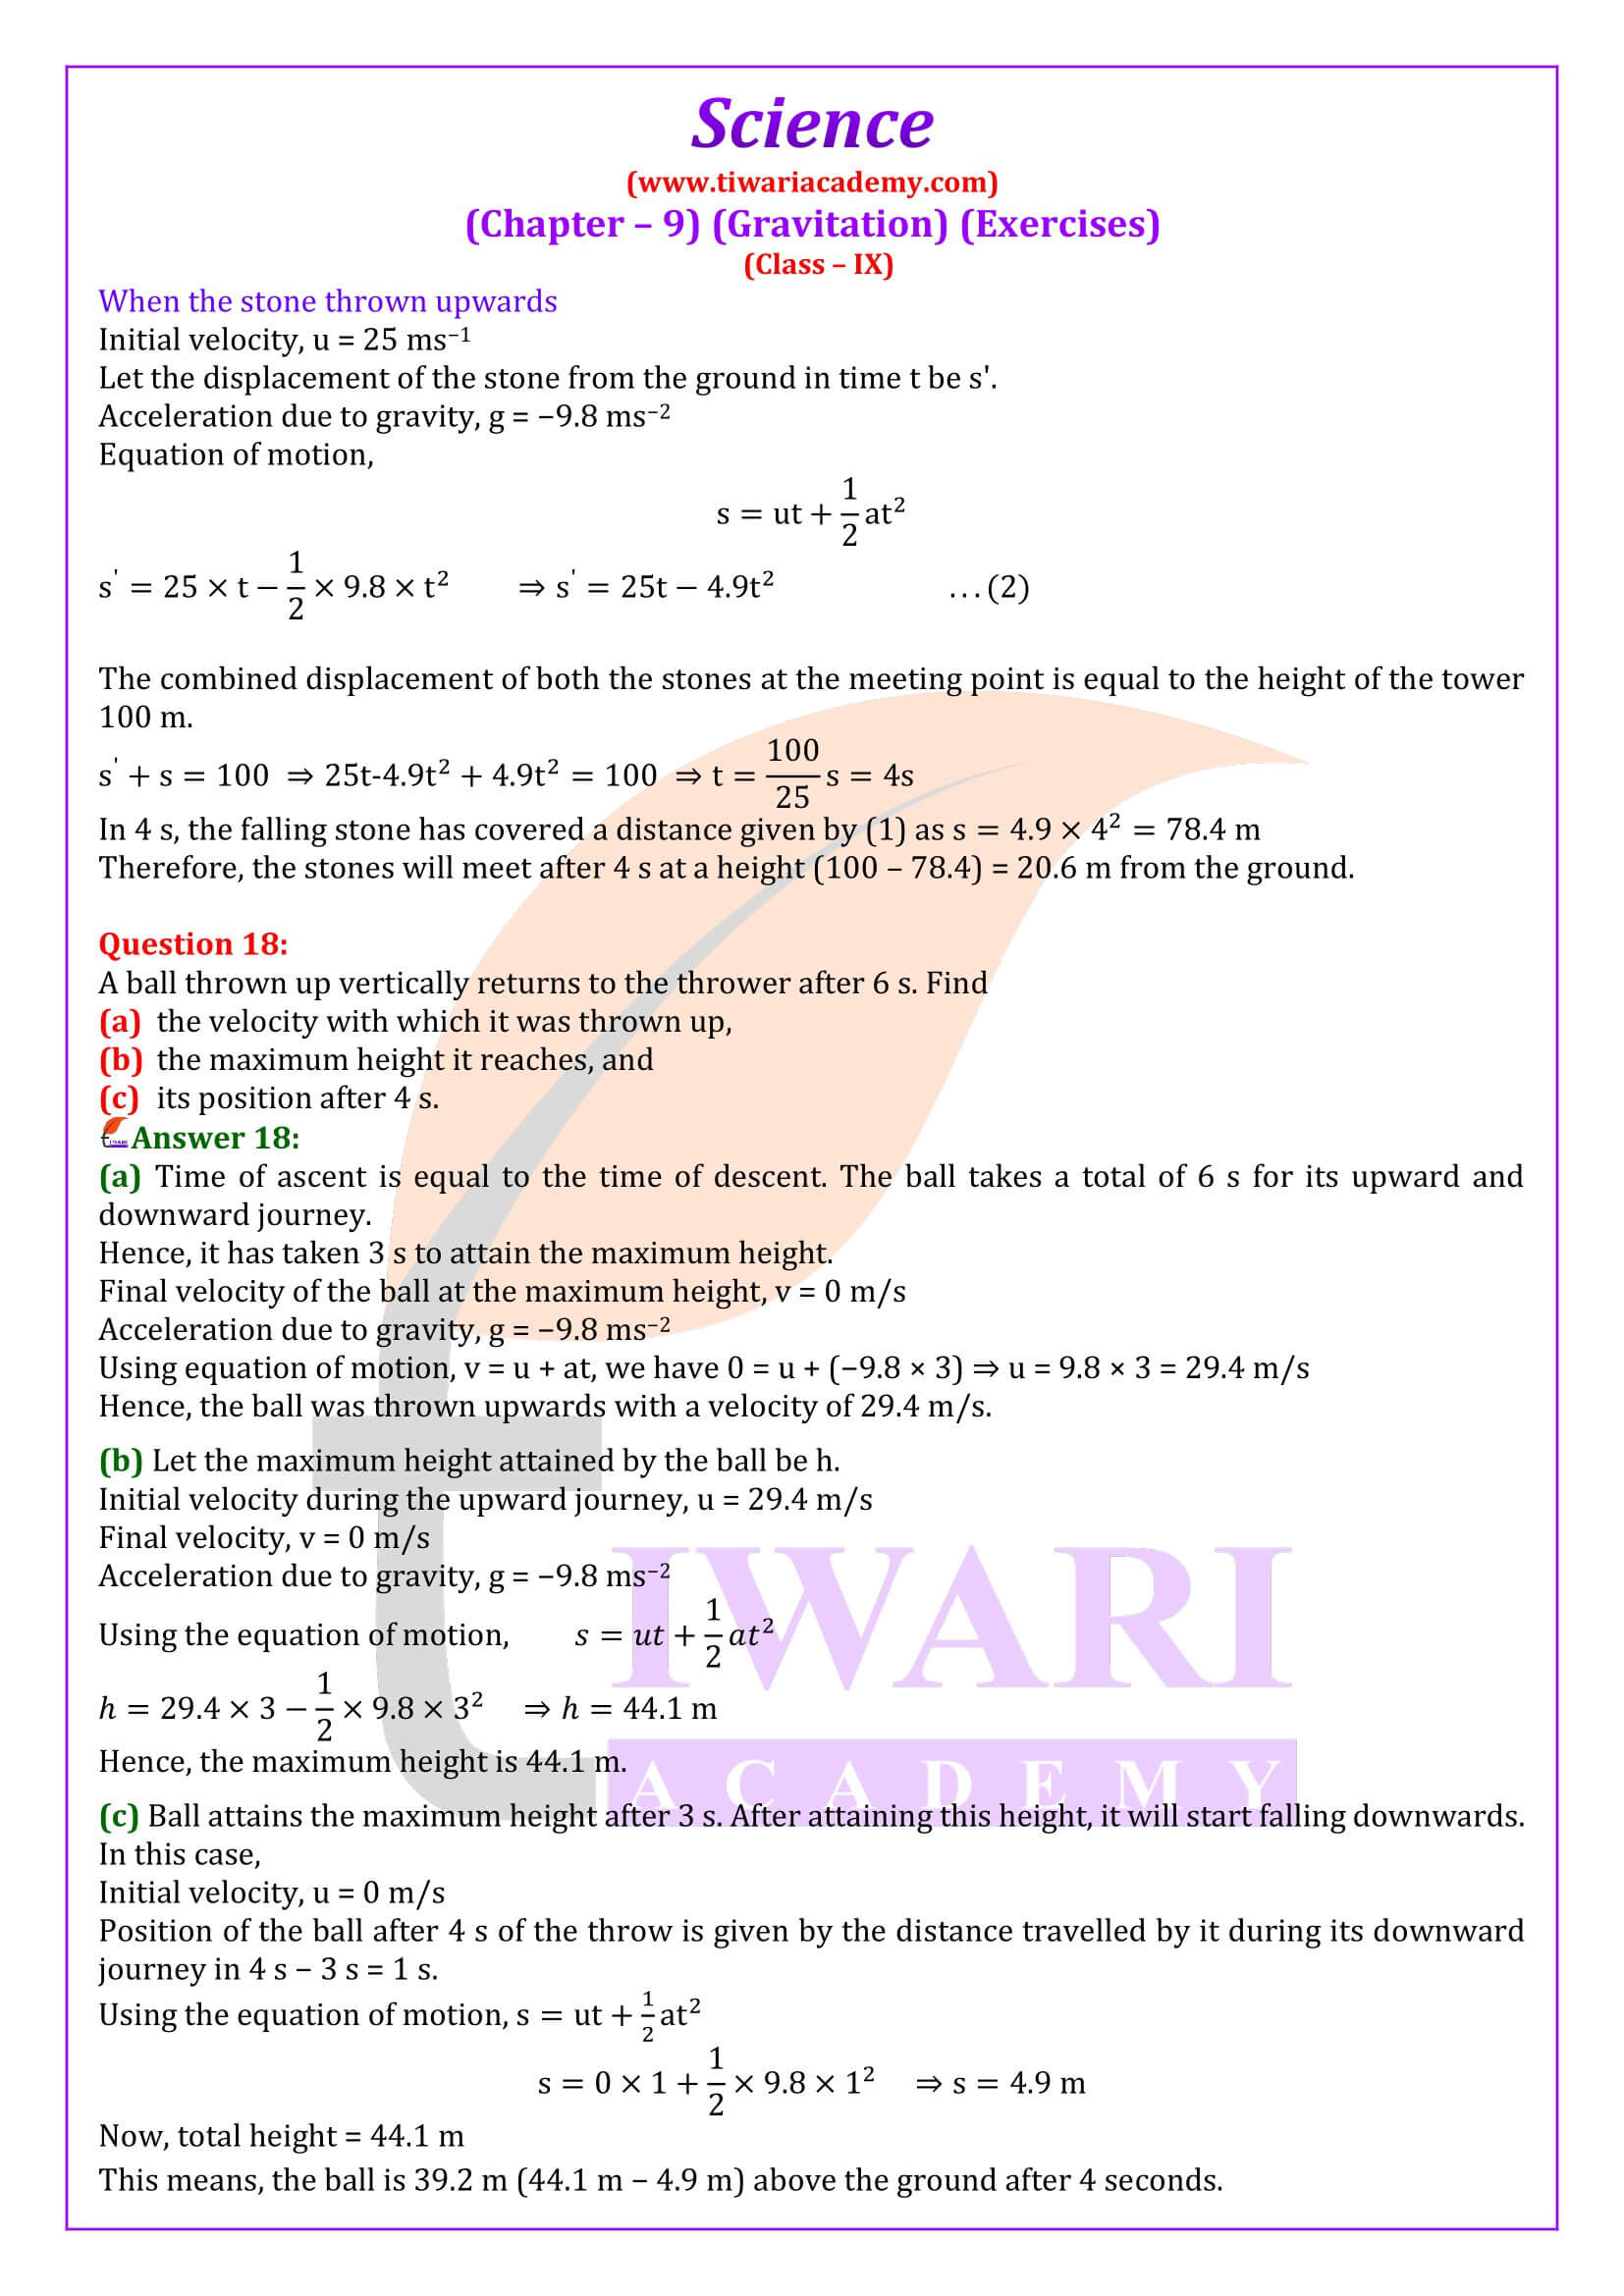 NCERT Solutions for Class 9 Science Chapter 9 in English Medium